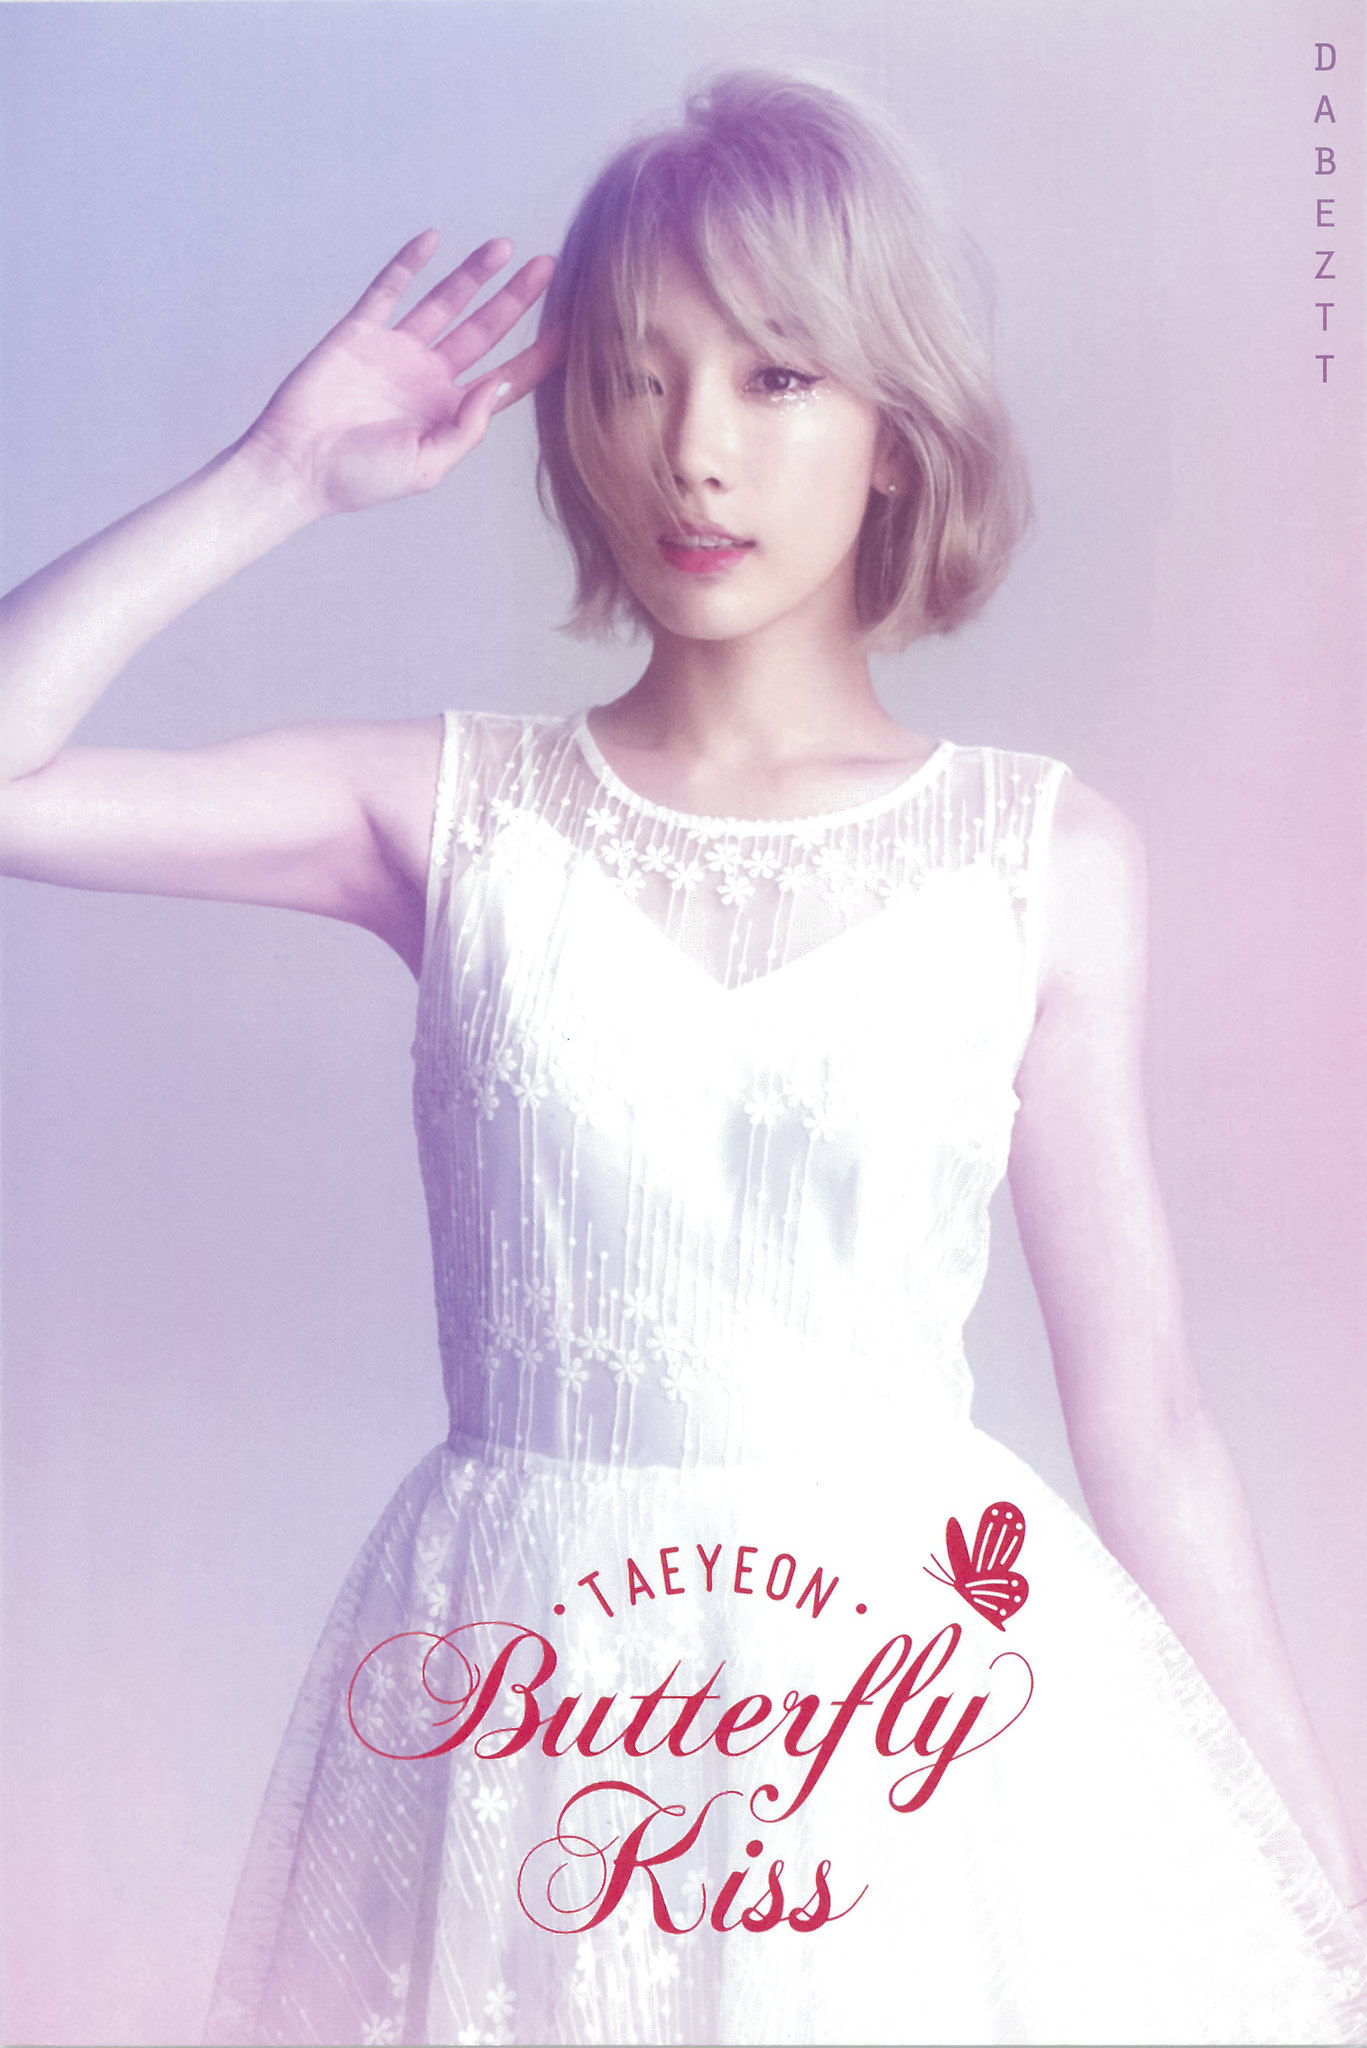 [PIC][24-05-2016]TaeYeon @ Solo Concert “Butterfly Kiss” 28275973265_1b5d56592b_k